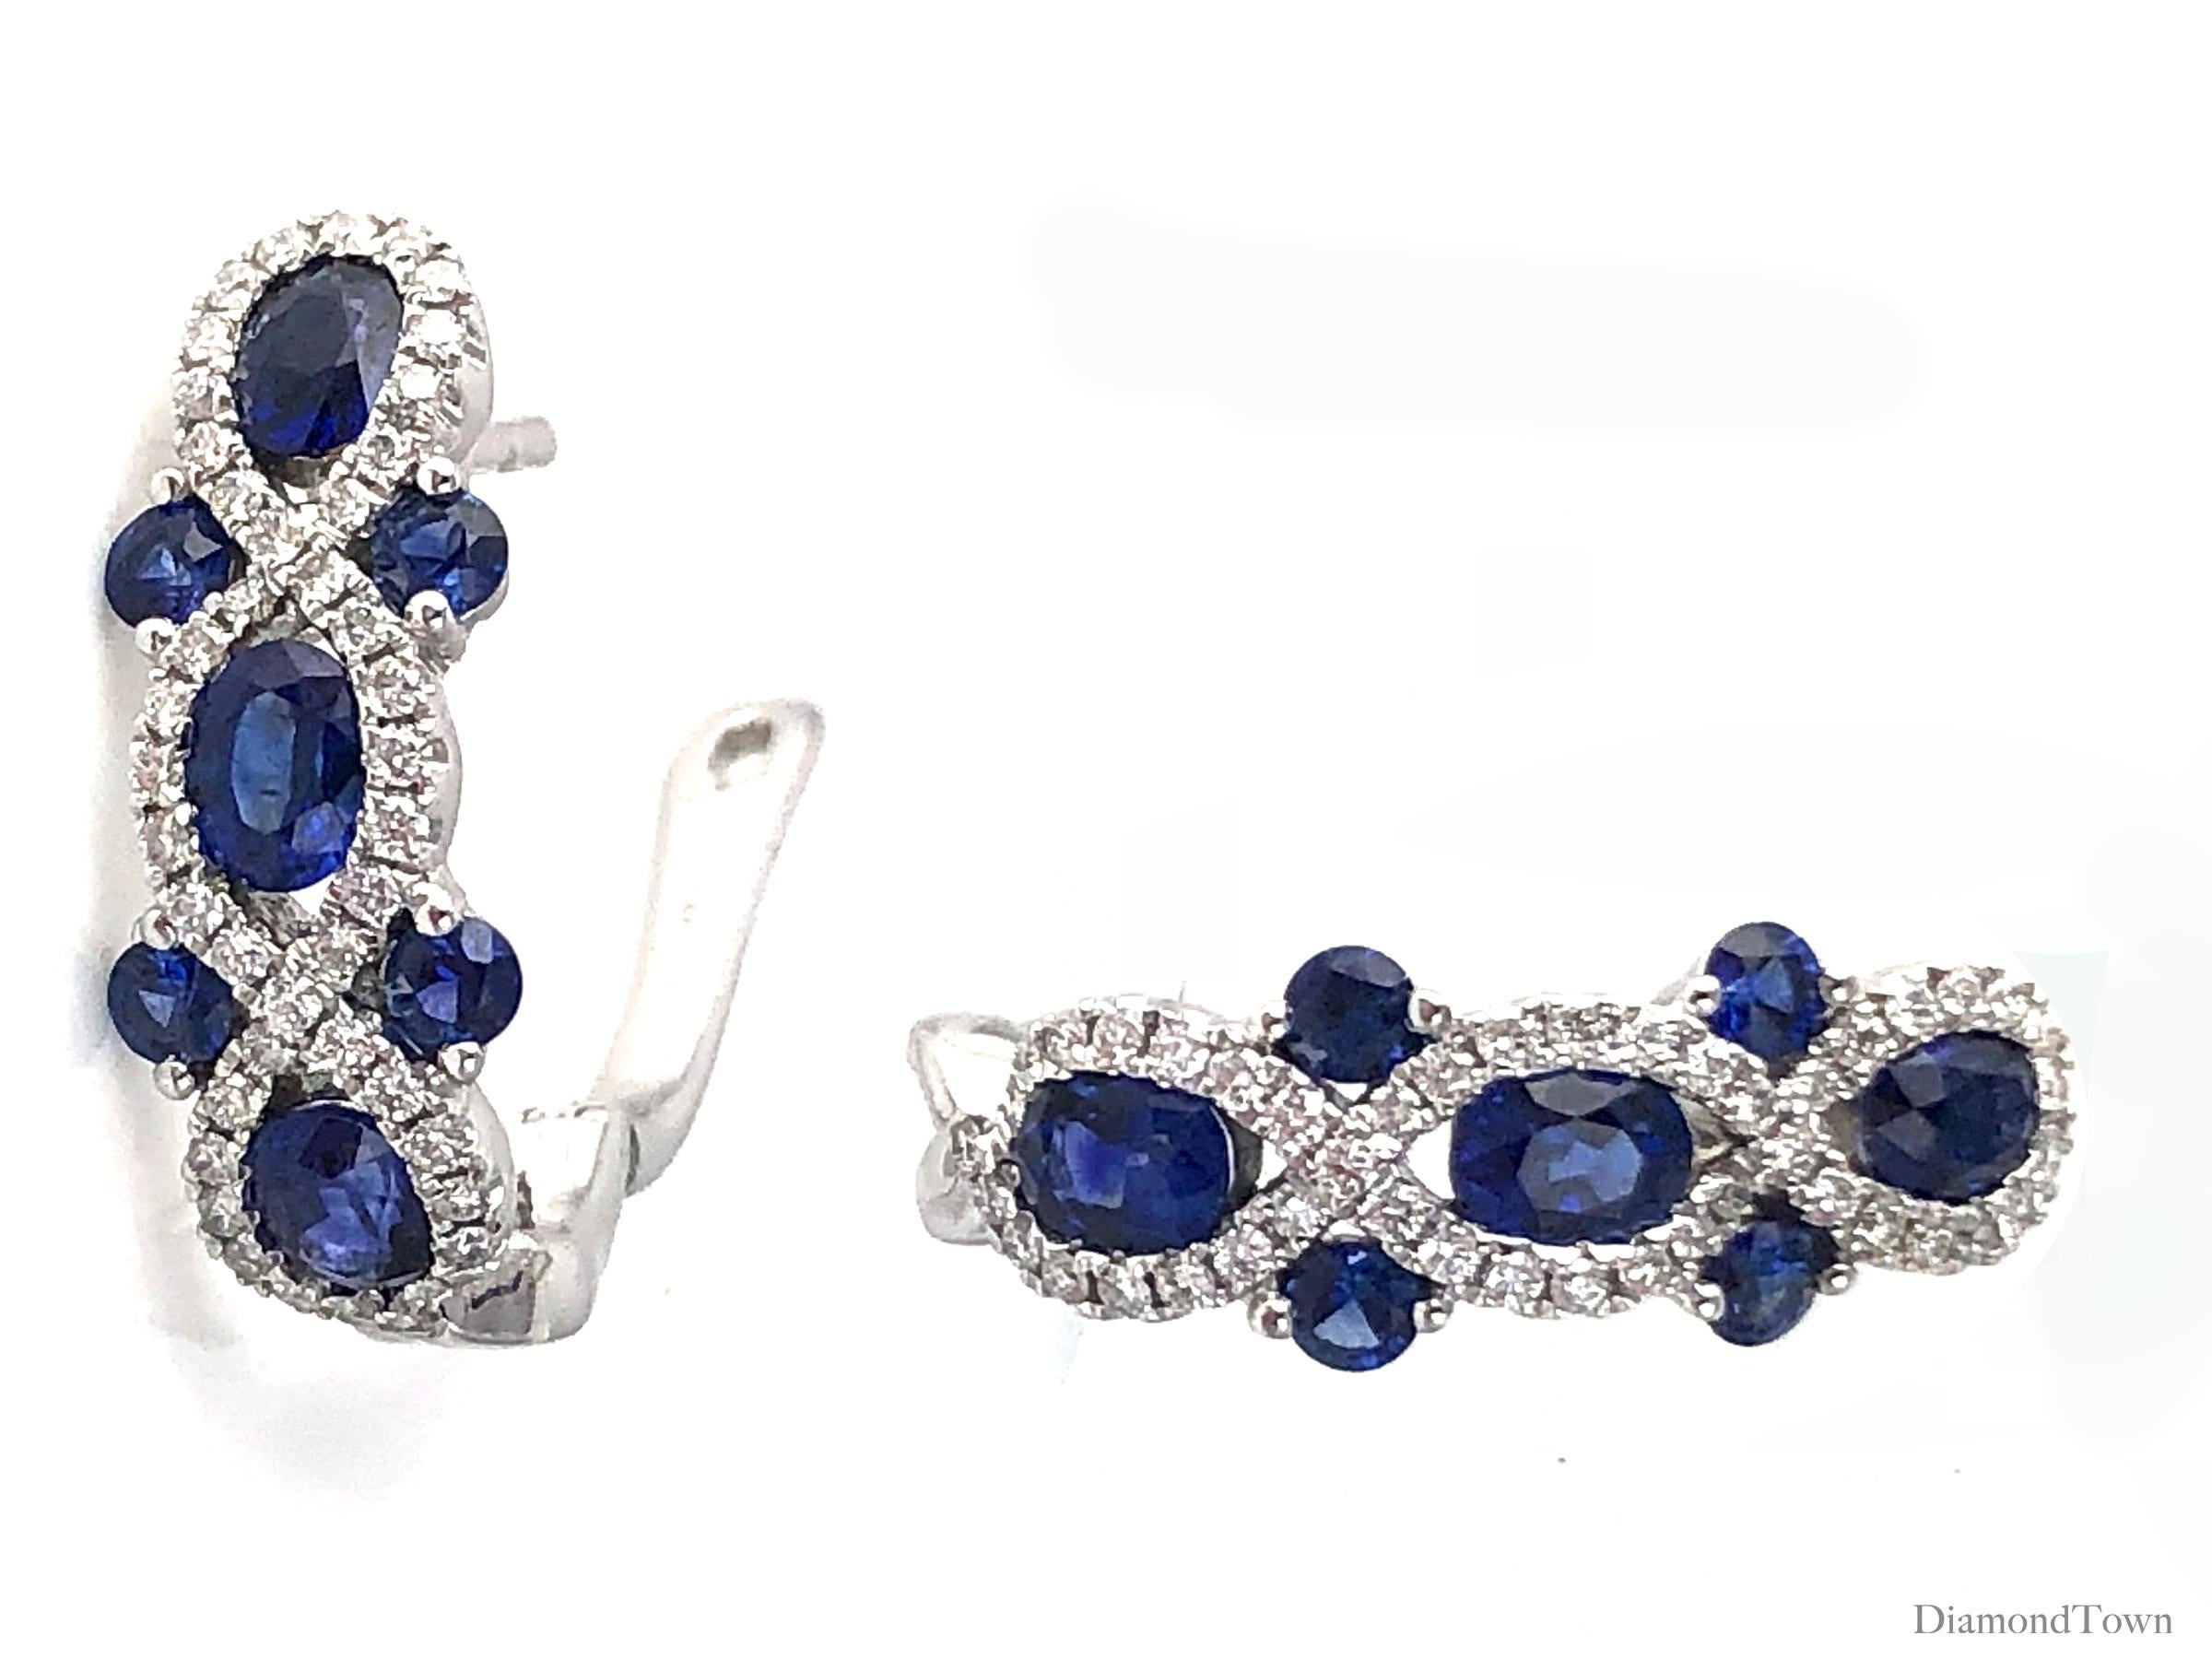 (DiamondTown) These stunning earrings feature round and oval cut vivid blue sapphires (total carat weight 2.52 carats) in an interlaced design of round white diamonds (total diamond weight 0.48 carats).

Set in 18k White Gold.
Lever-back